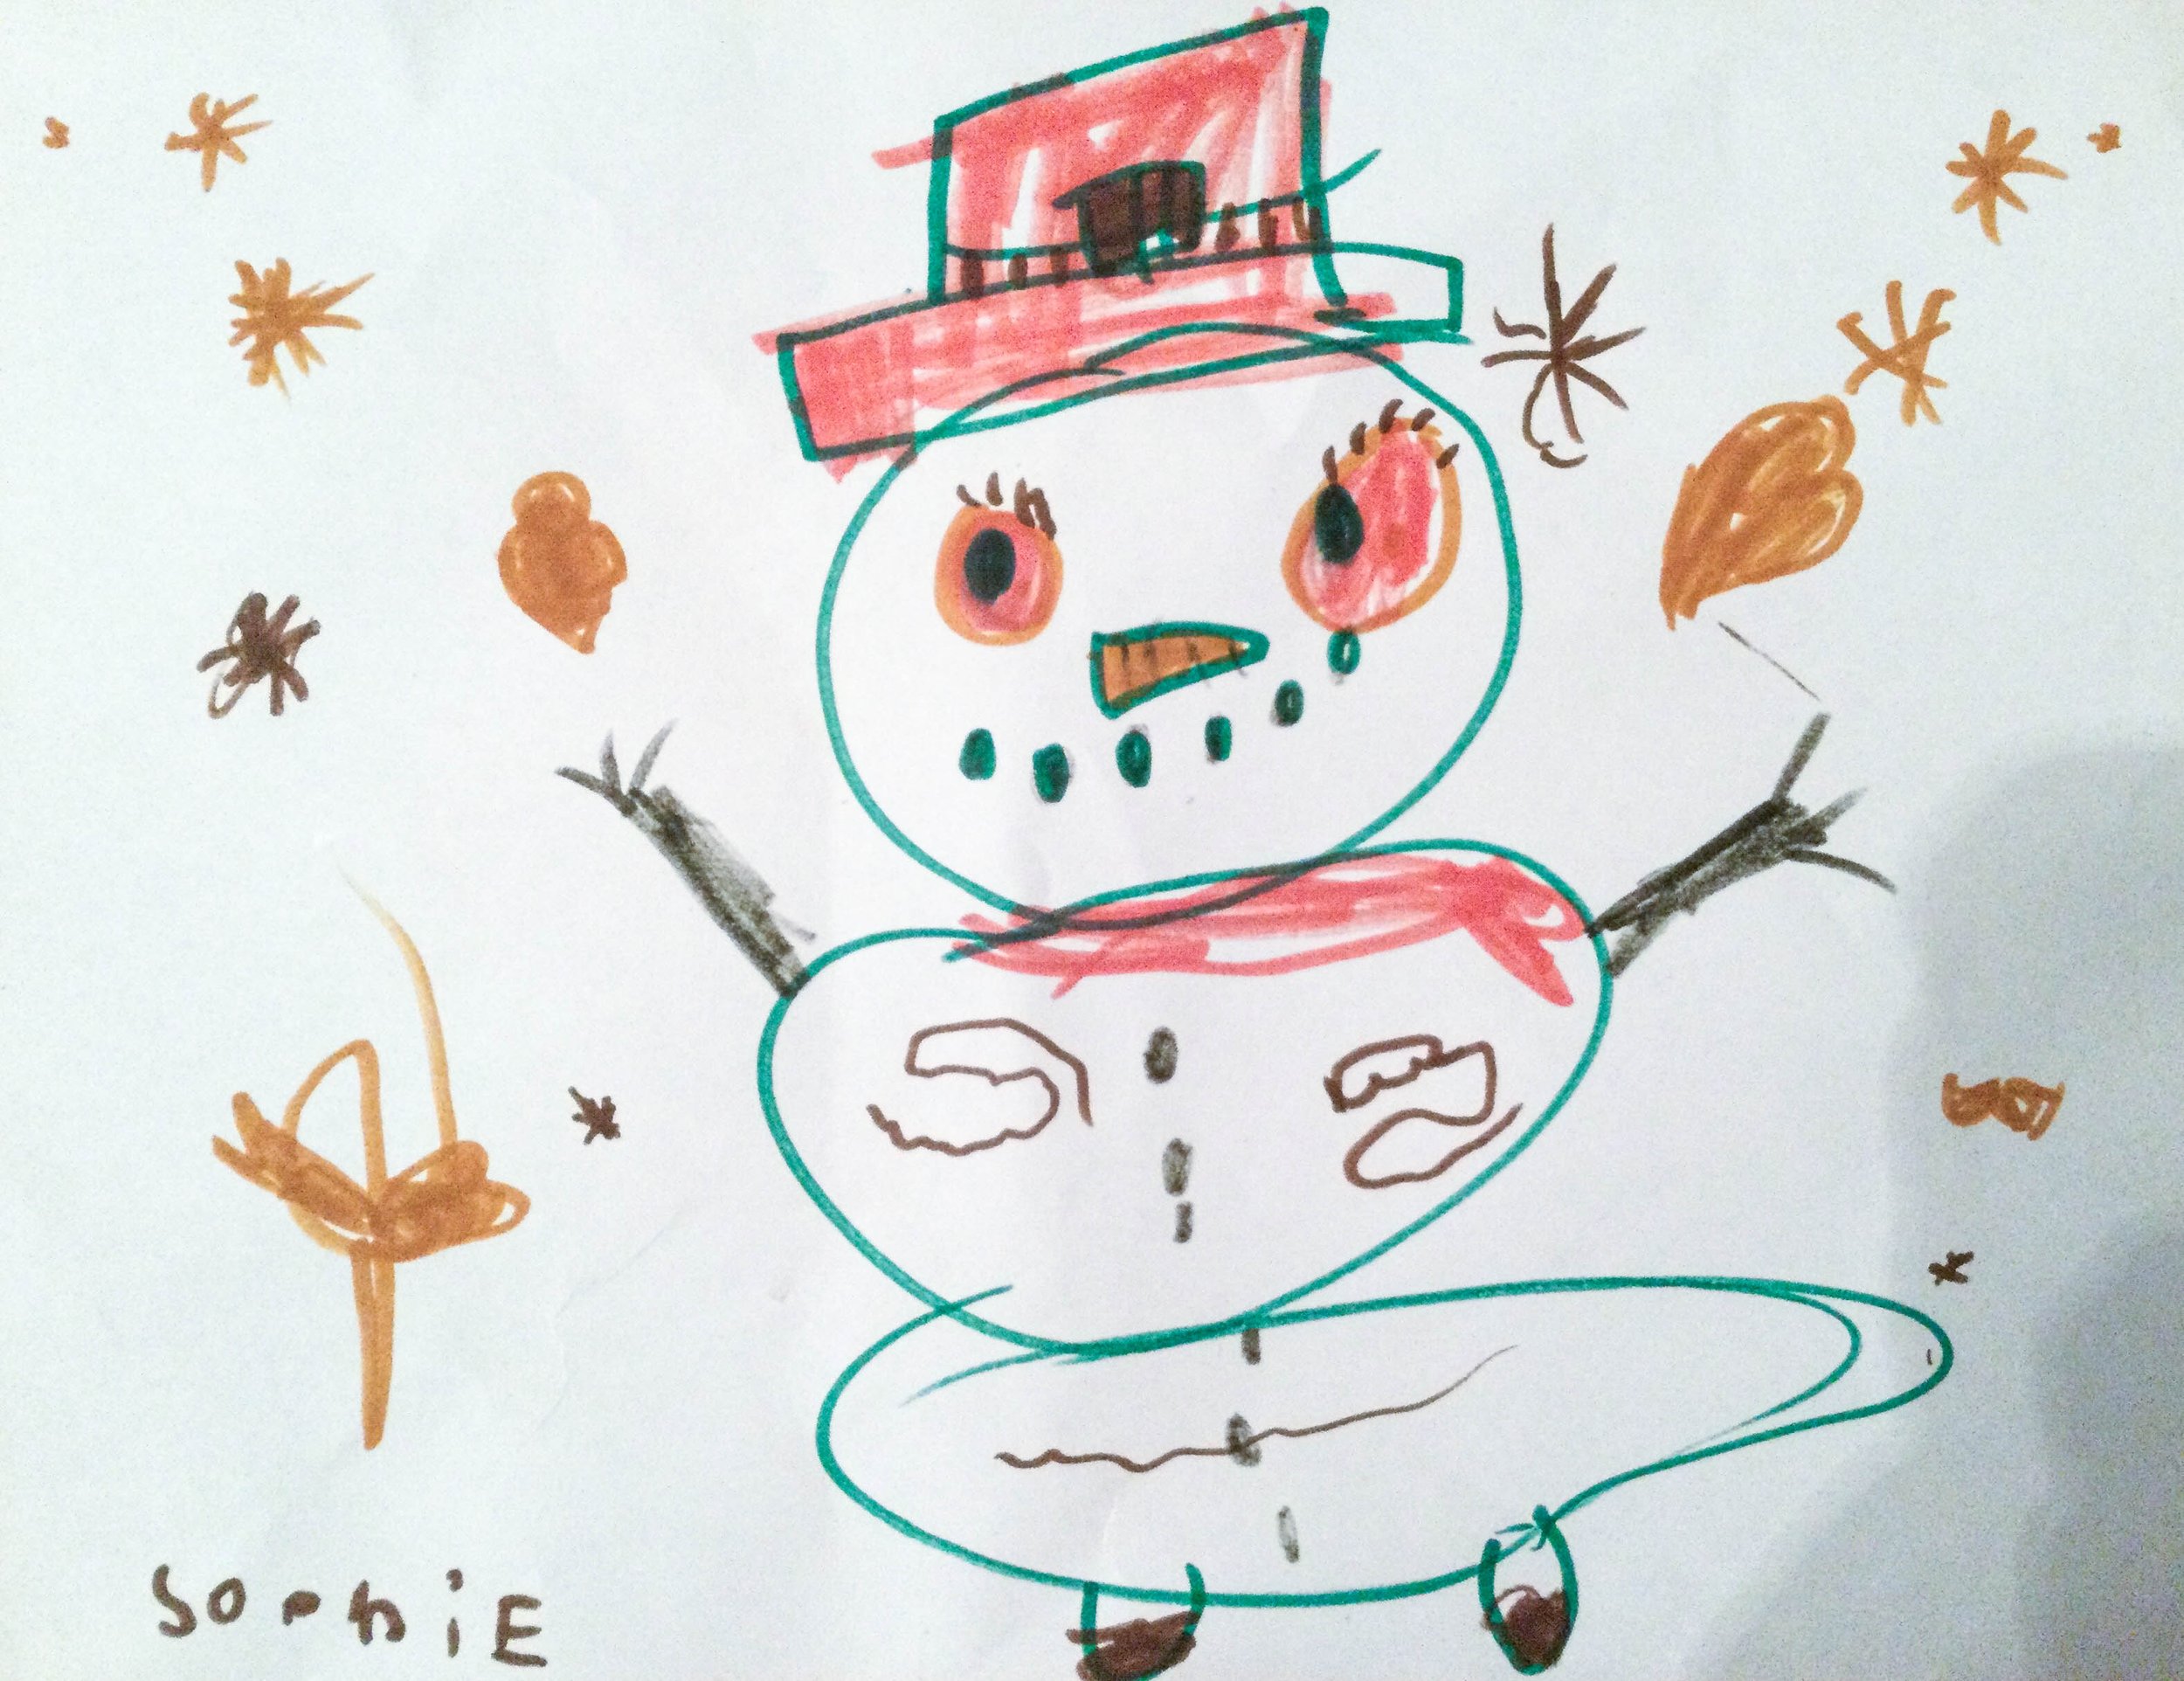 Artwork by Sophie, Age 5 from Fredericton